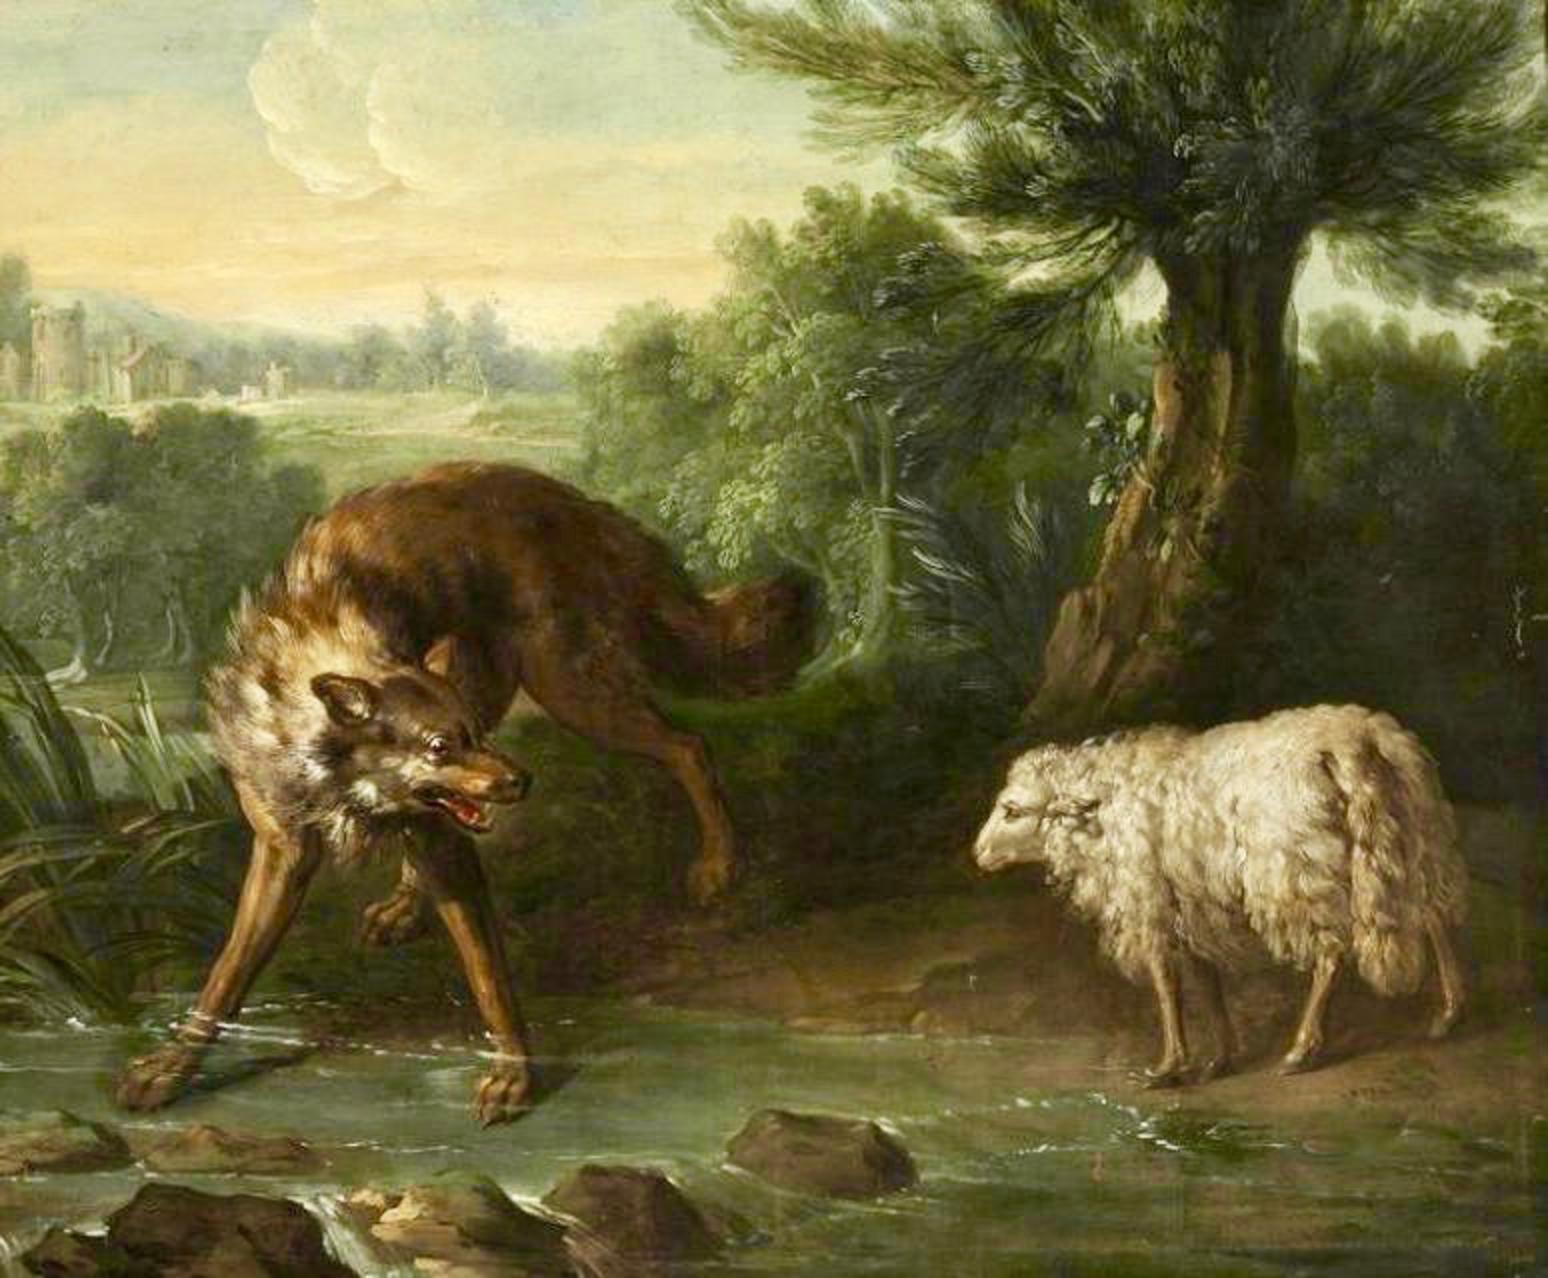 Wolves were exterminated in England hundreds of years ago. The last wolves found in the rugged and remote Scottish Highlands were killed off by sport hunters and as forms of predator control to protect livestock.  Painting of wolf and sheep in Europe by Jean-Baptiste Oudry